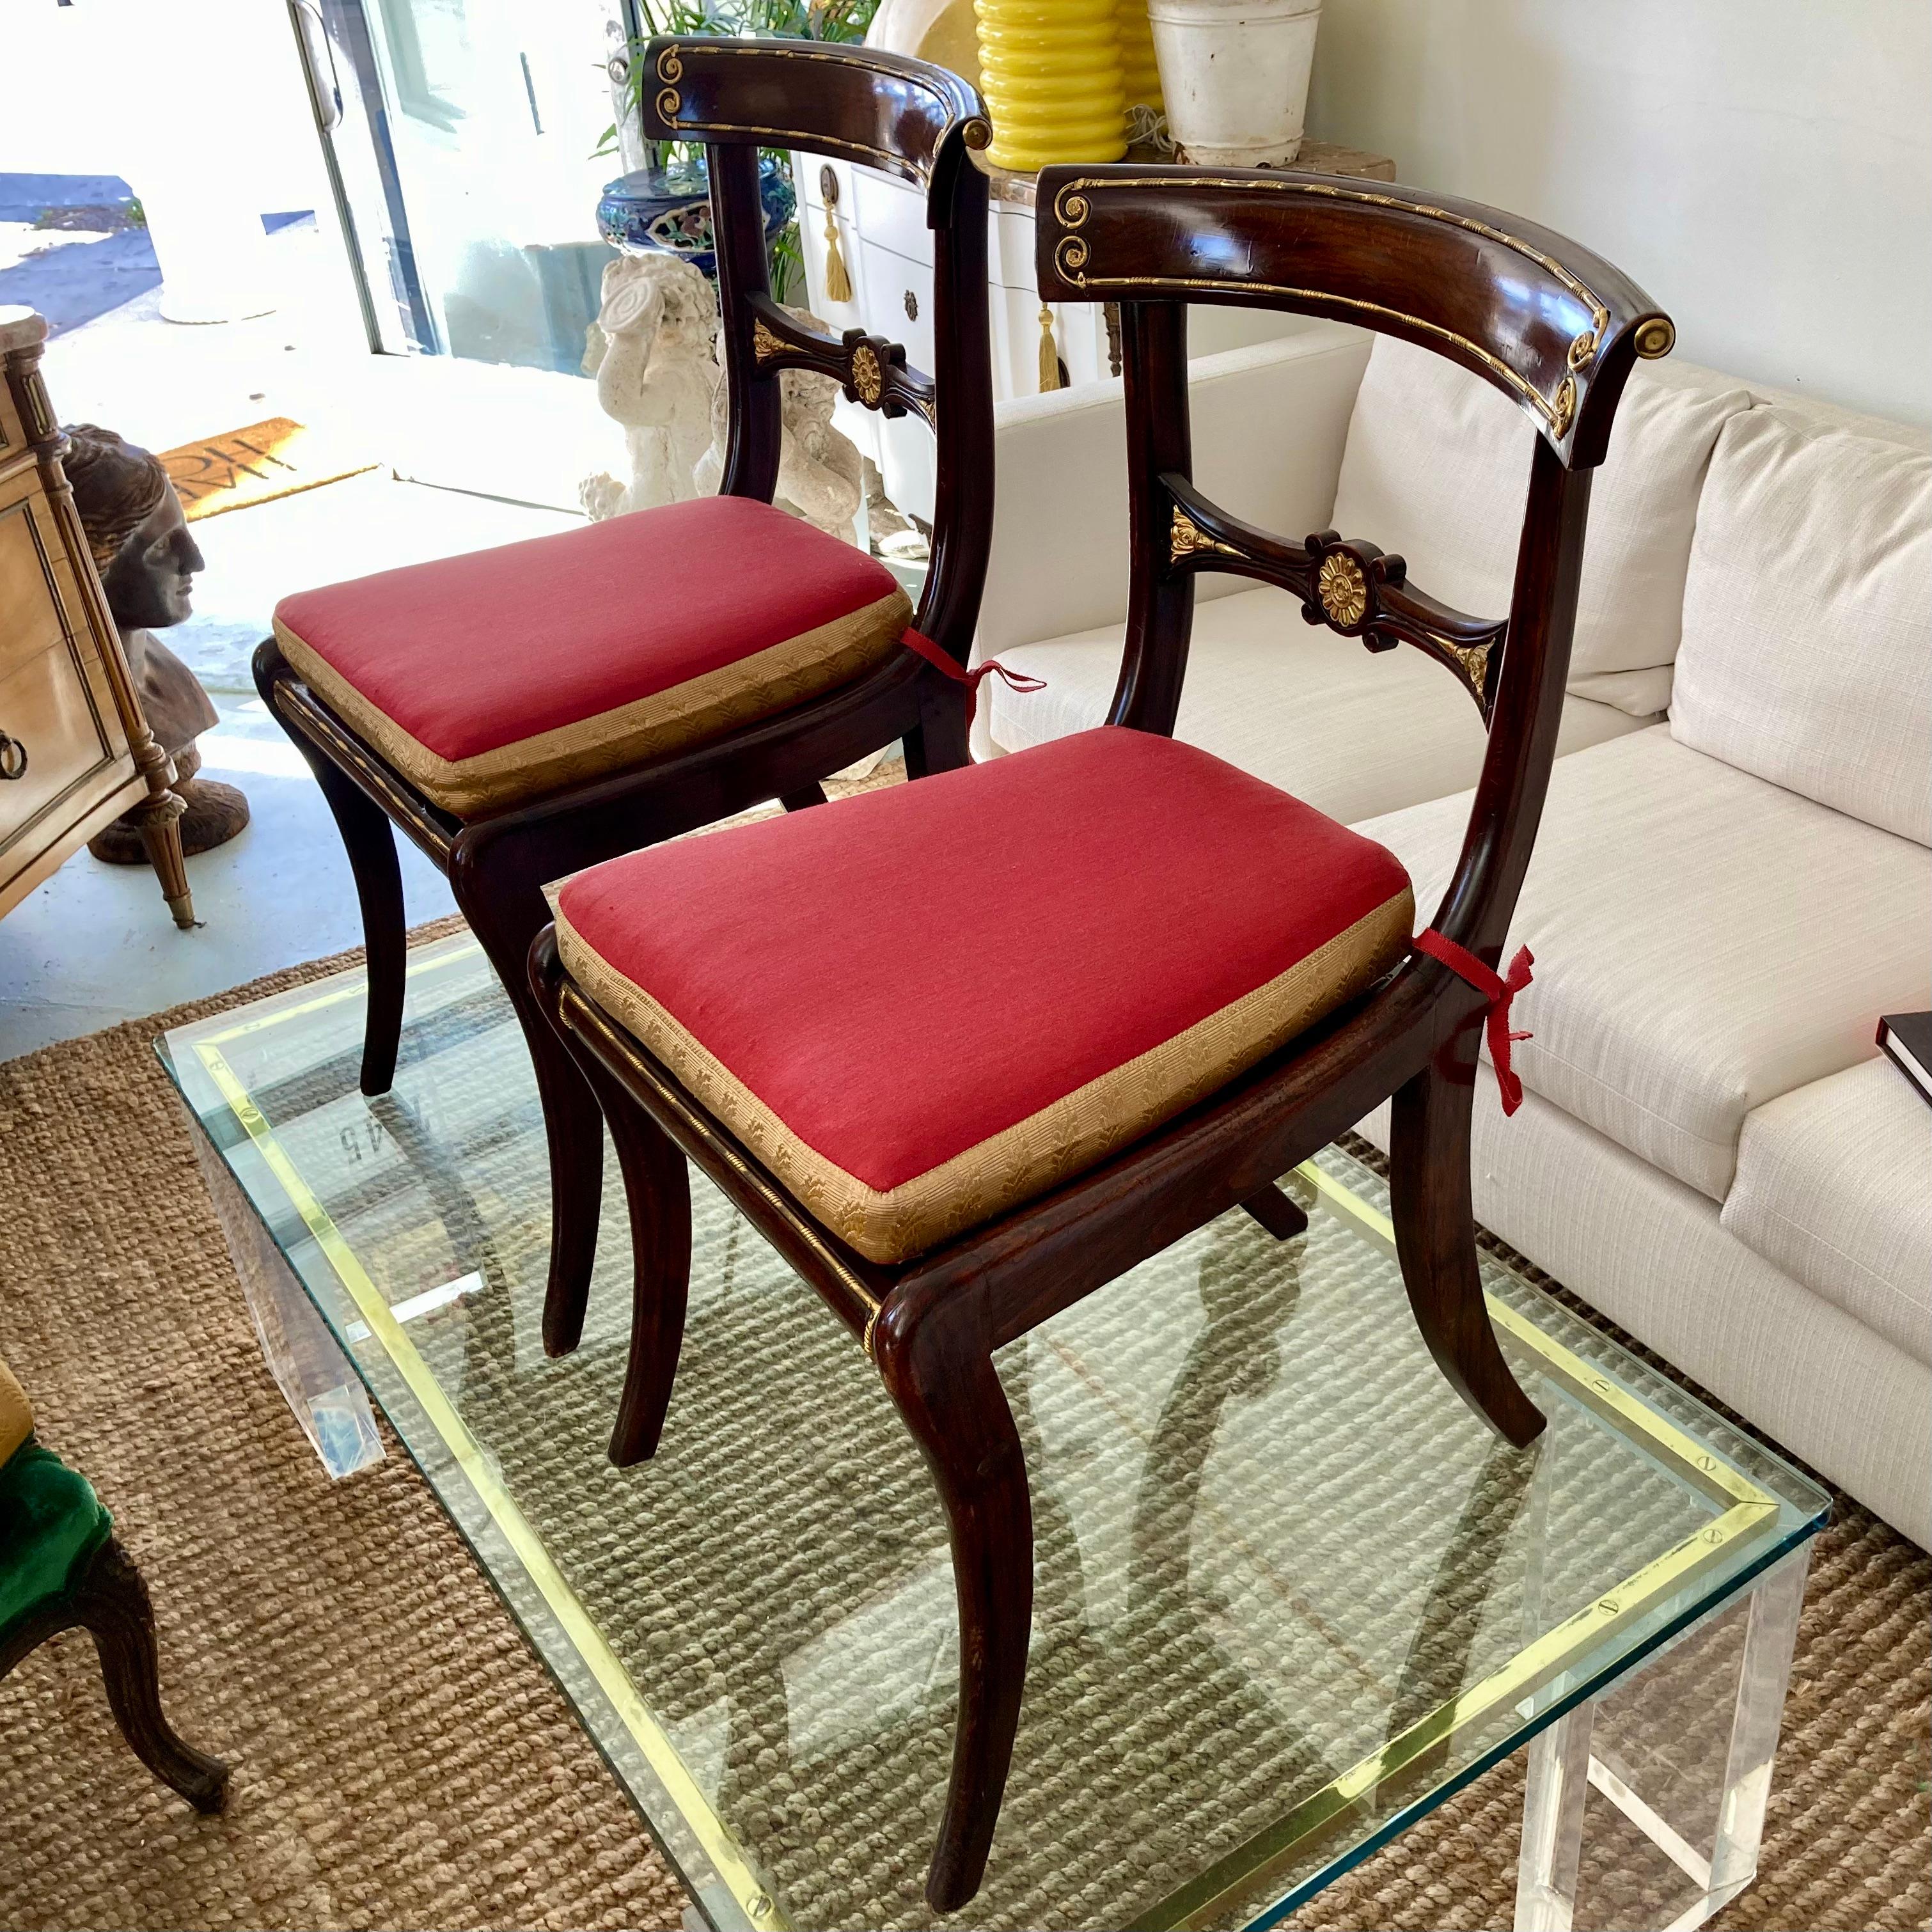 19th C Ormolu Inset Regency Chairs With Red Cushions and Gold Metal, Set of 8 For Sale 1